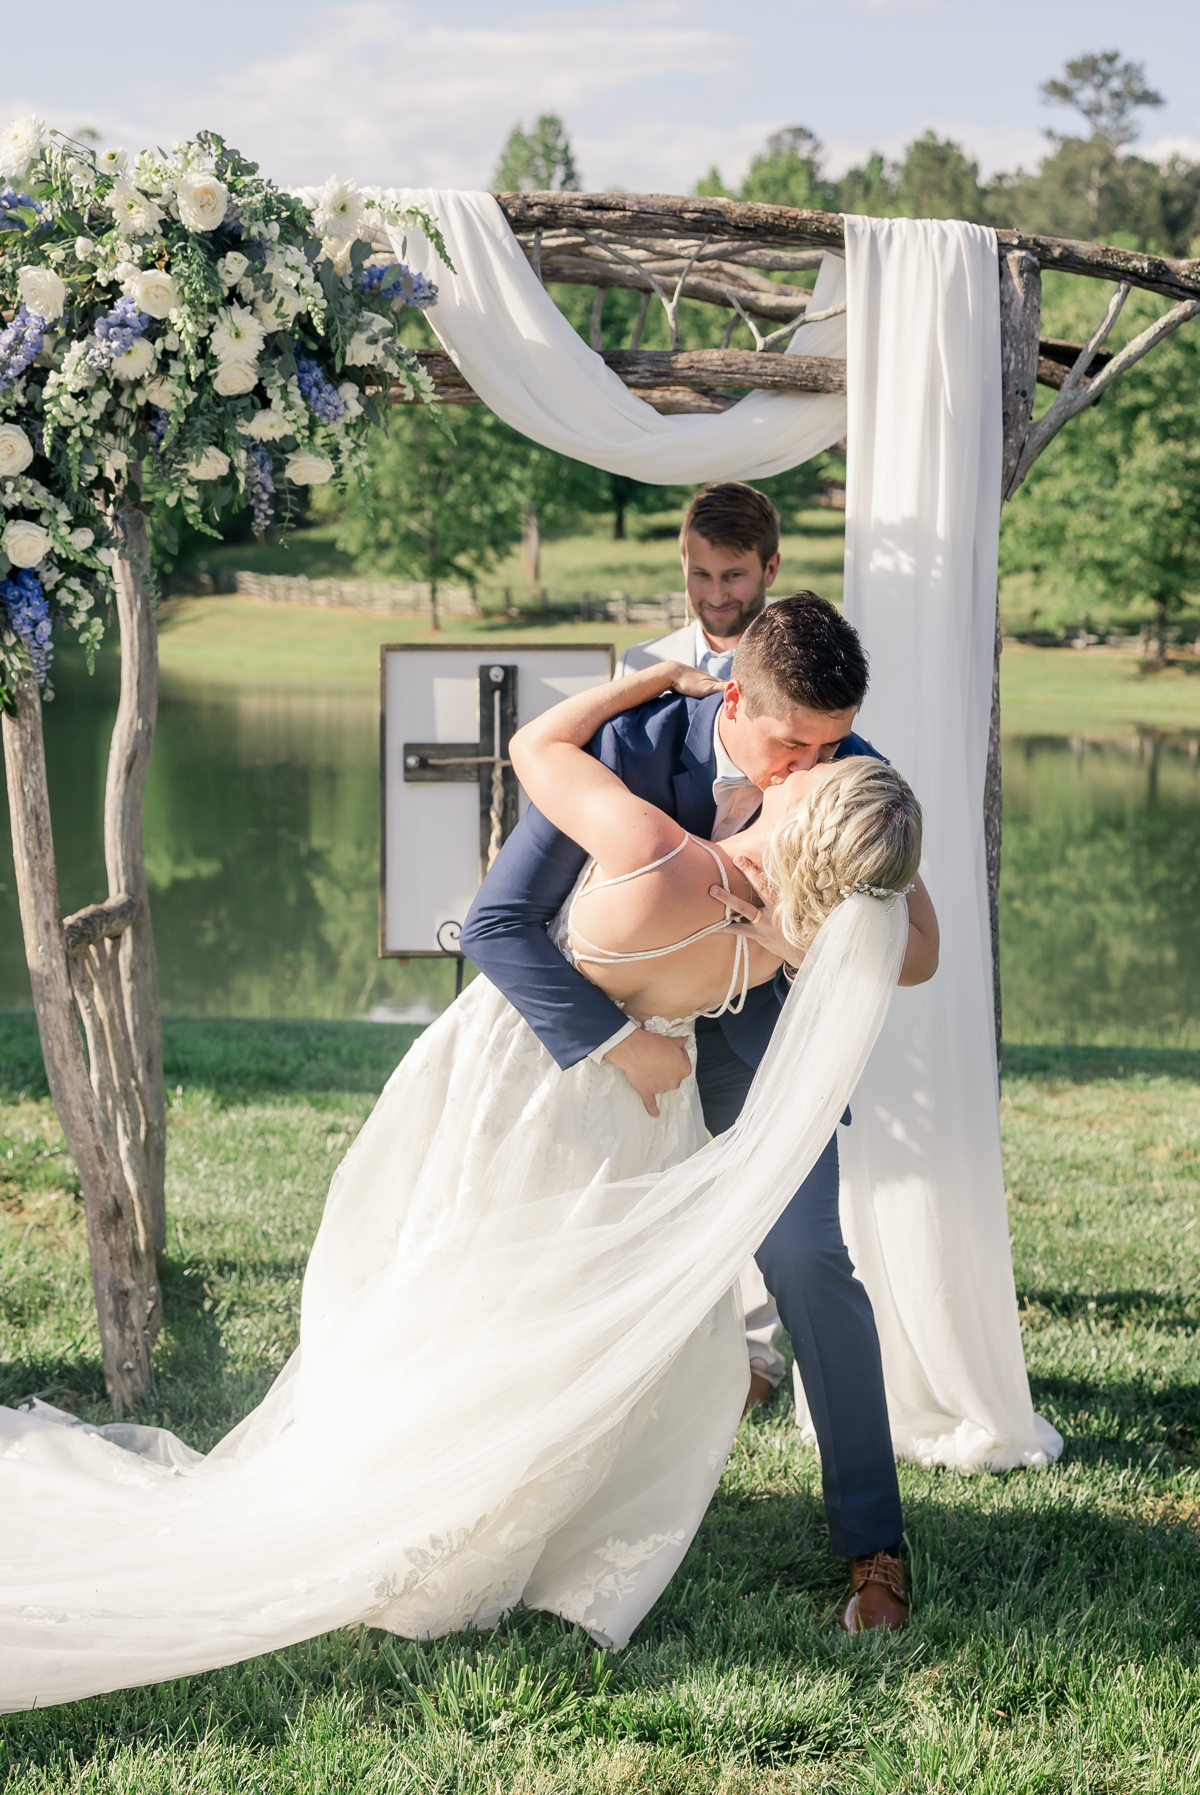 Chris dipping and kissing Grace during their first kiss as husband and wife at Walters Barn.